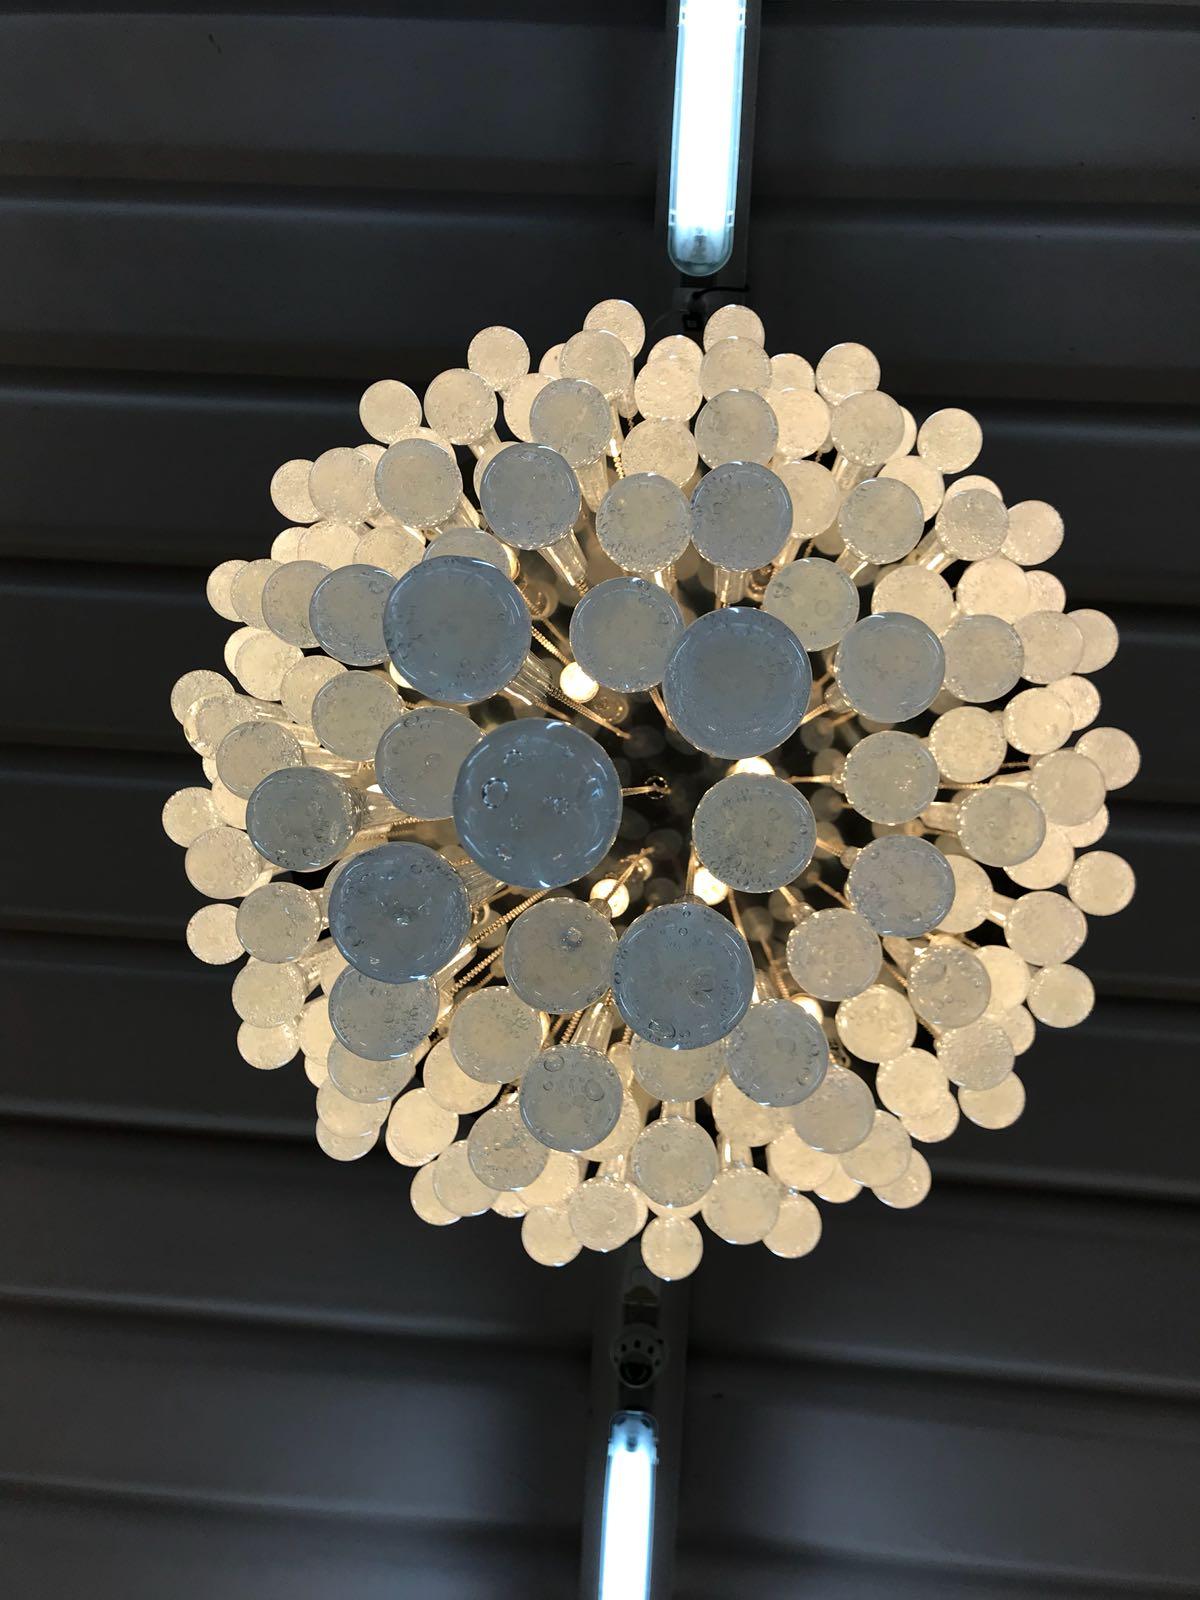 Elegant Venetian chandelier crafted using the famous Murano glassmaking technique. Its original design plays on the repetition of sparkling glass elements, capable of creating elegantly sophisticated lighting. The modular structure of this